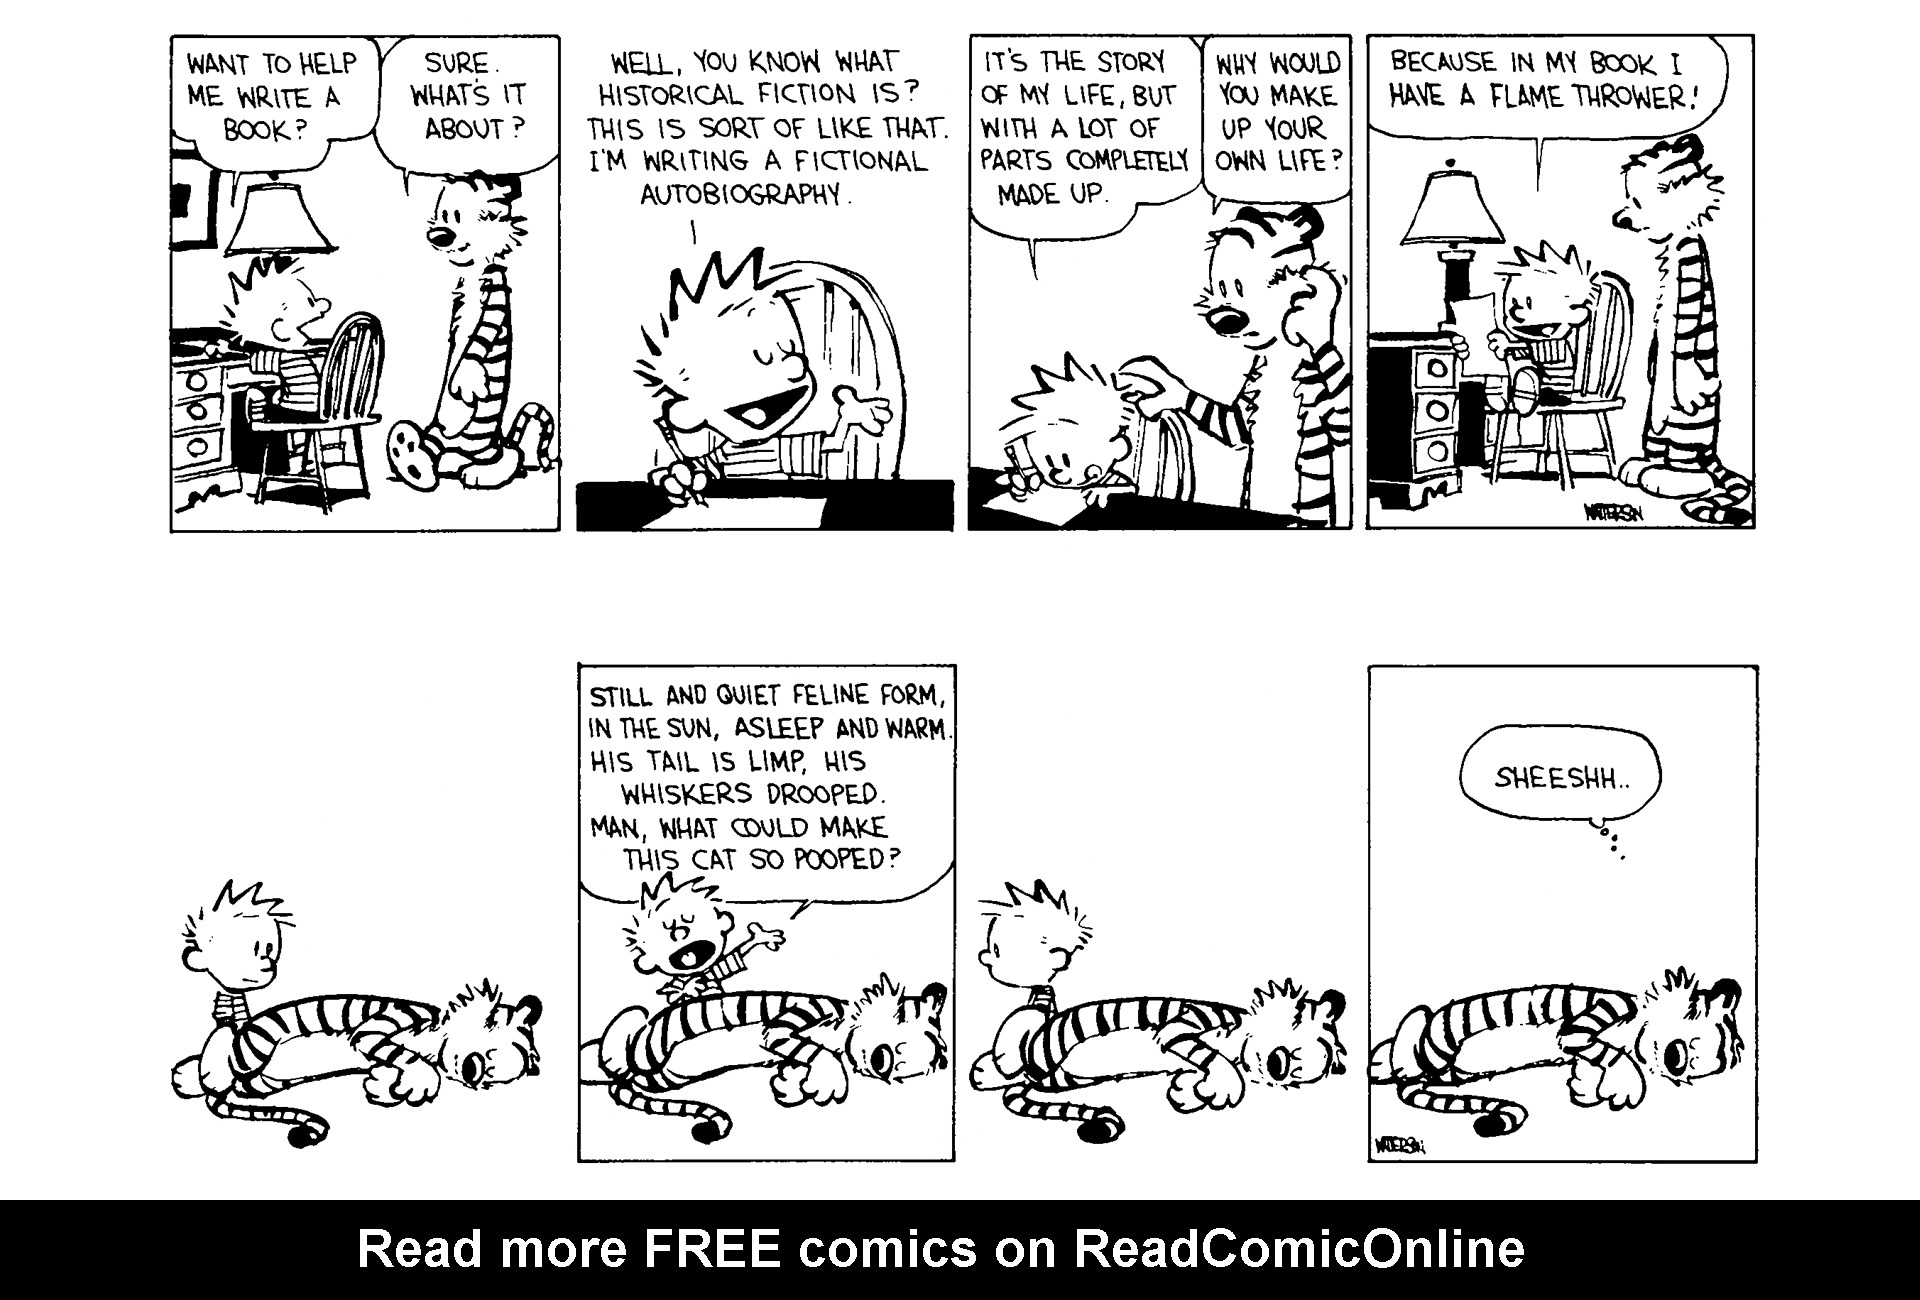 Calvin And Hobbes Issue 6 Read Calvin And Hobbes Issue 6 Comic Online